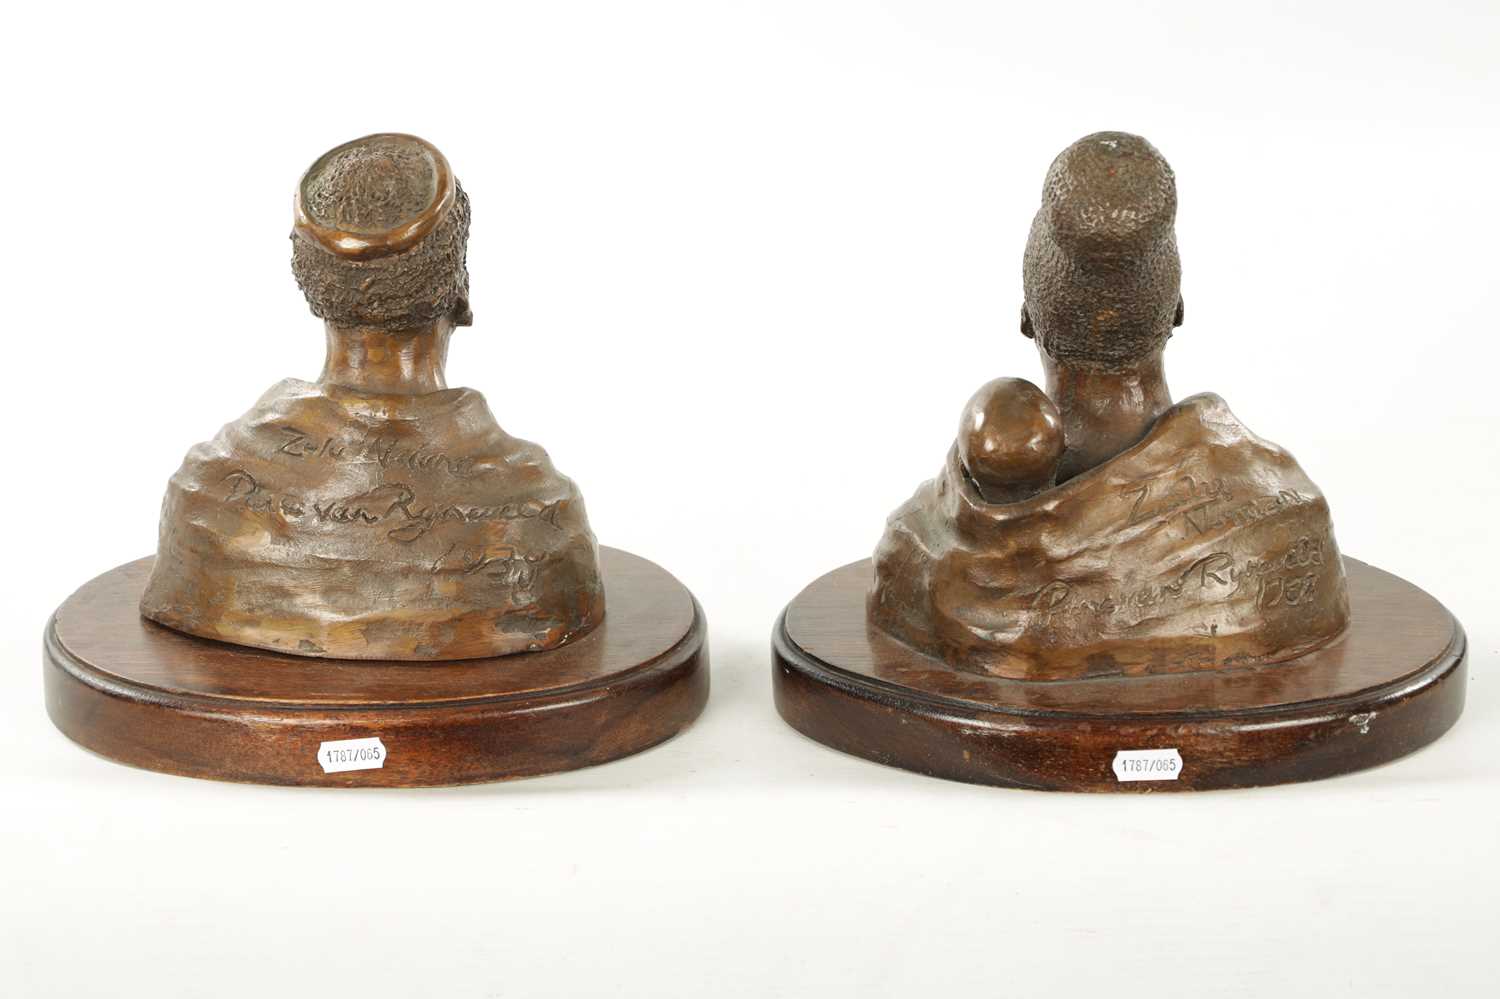 A PAIR OF 20TH CENTURY BRONZE SCULPTURES DEPICTING A ZULU WOMEN AND MAN BY PIERRE VAN RYNEVELD SIGNE - Image 8 of 10